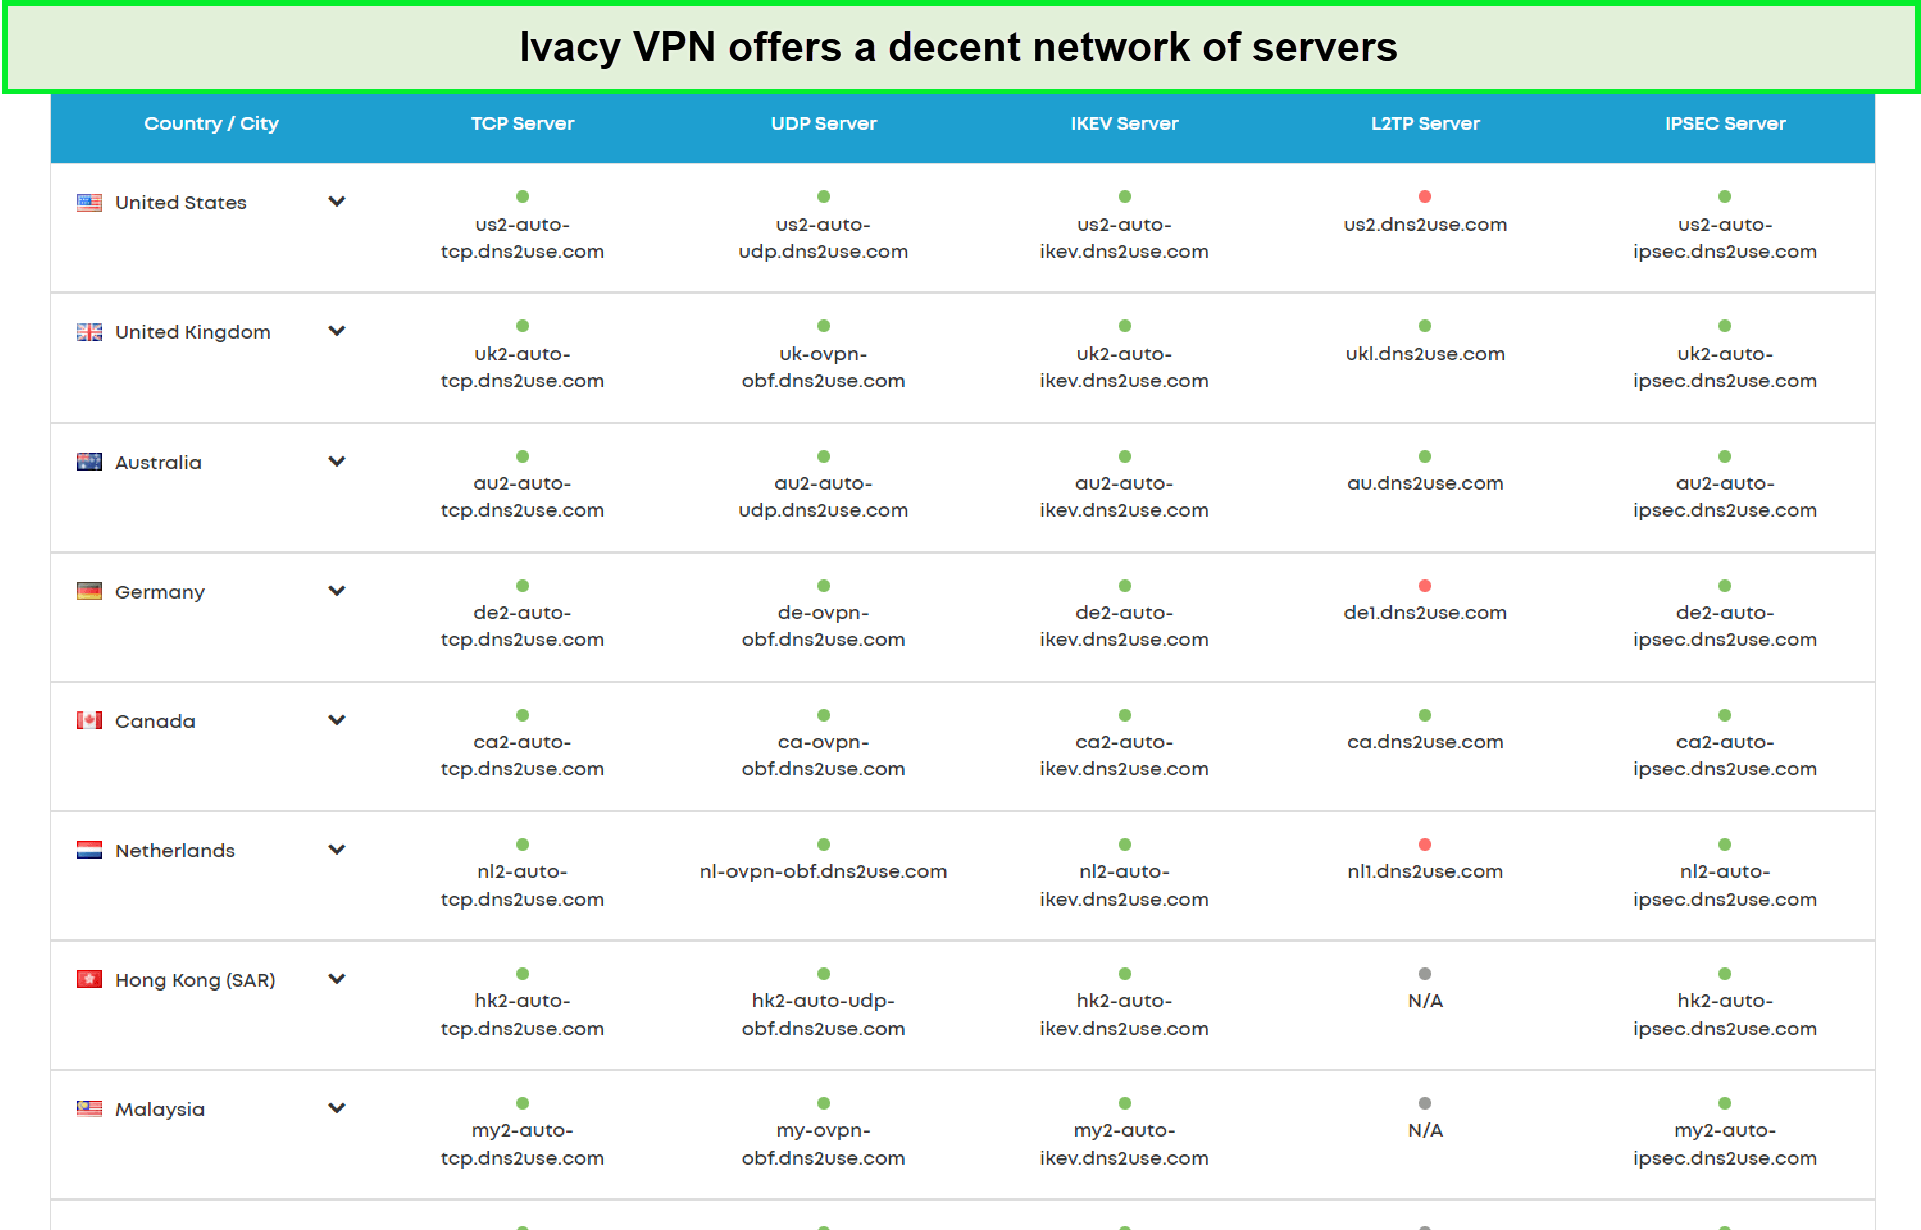 ivacy-server-network-in-USA